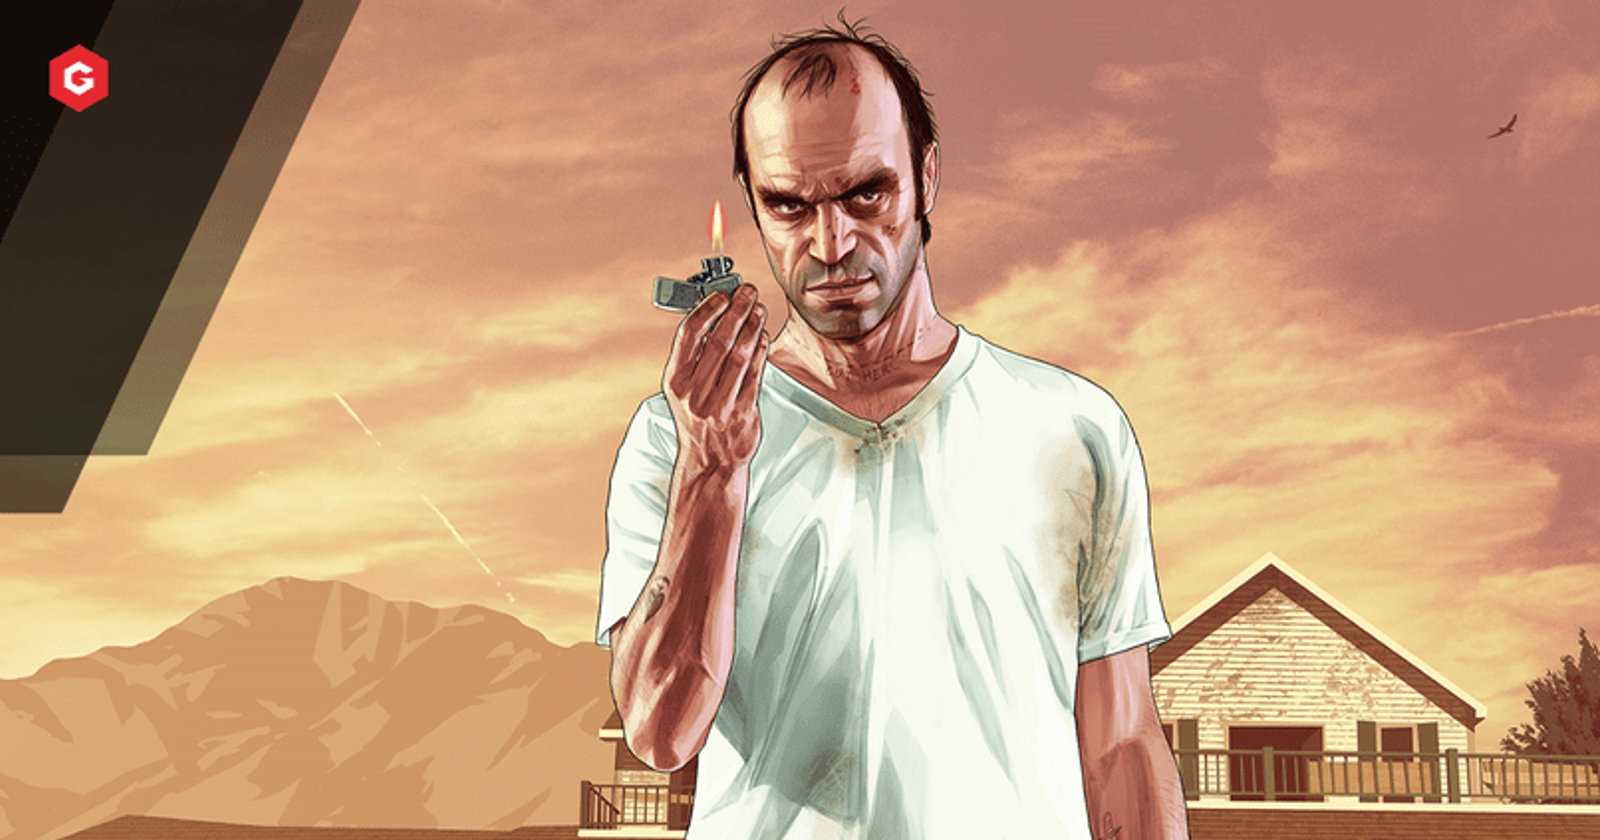 All You Need to Know About Grand Theft Auto 5 and Cross-platform Play